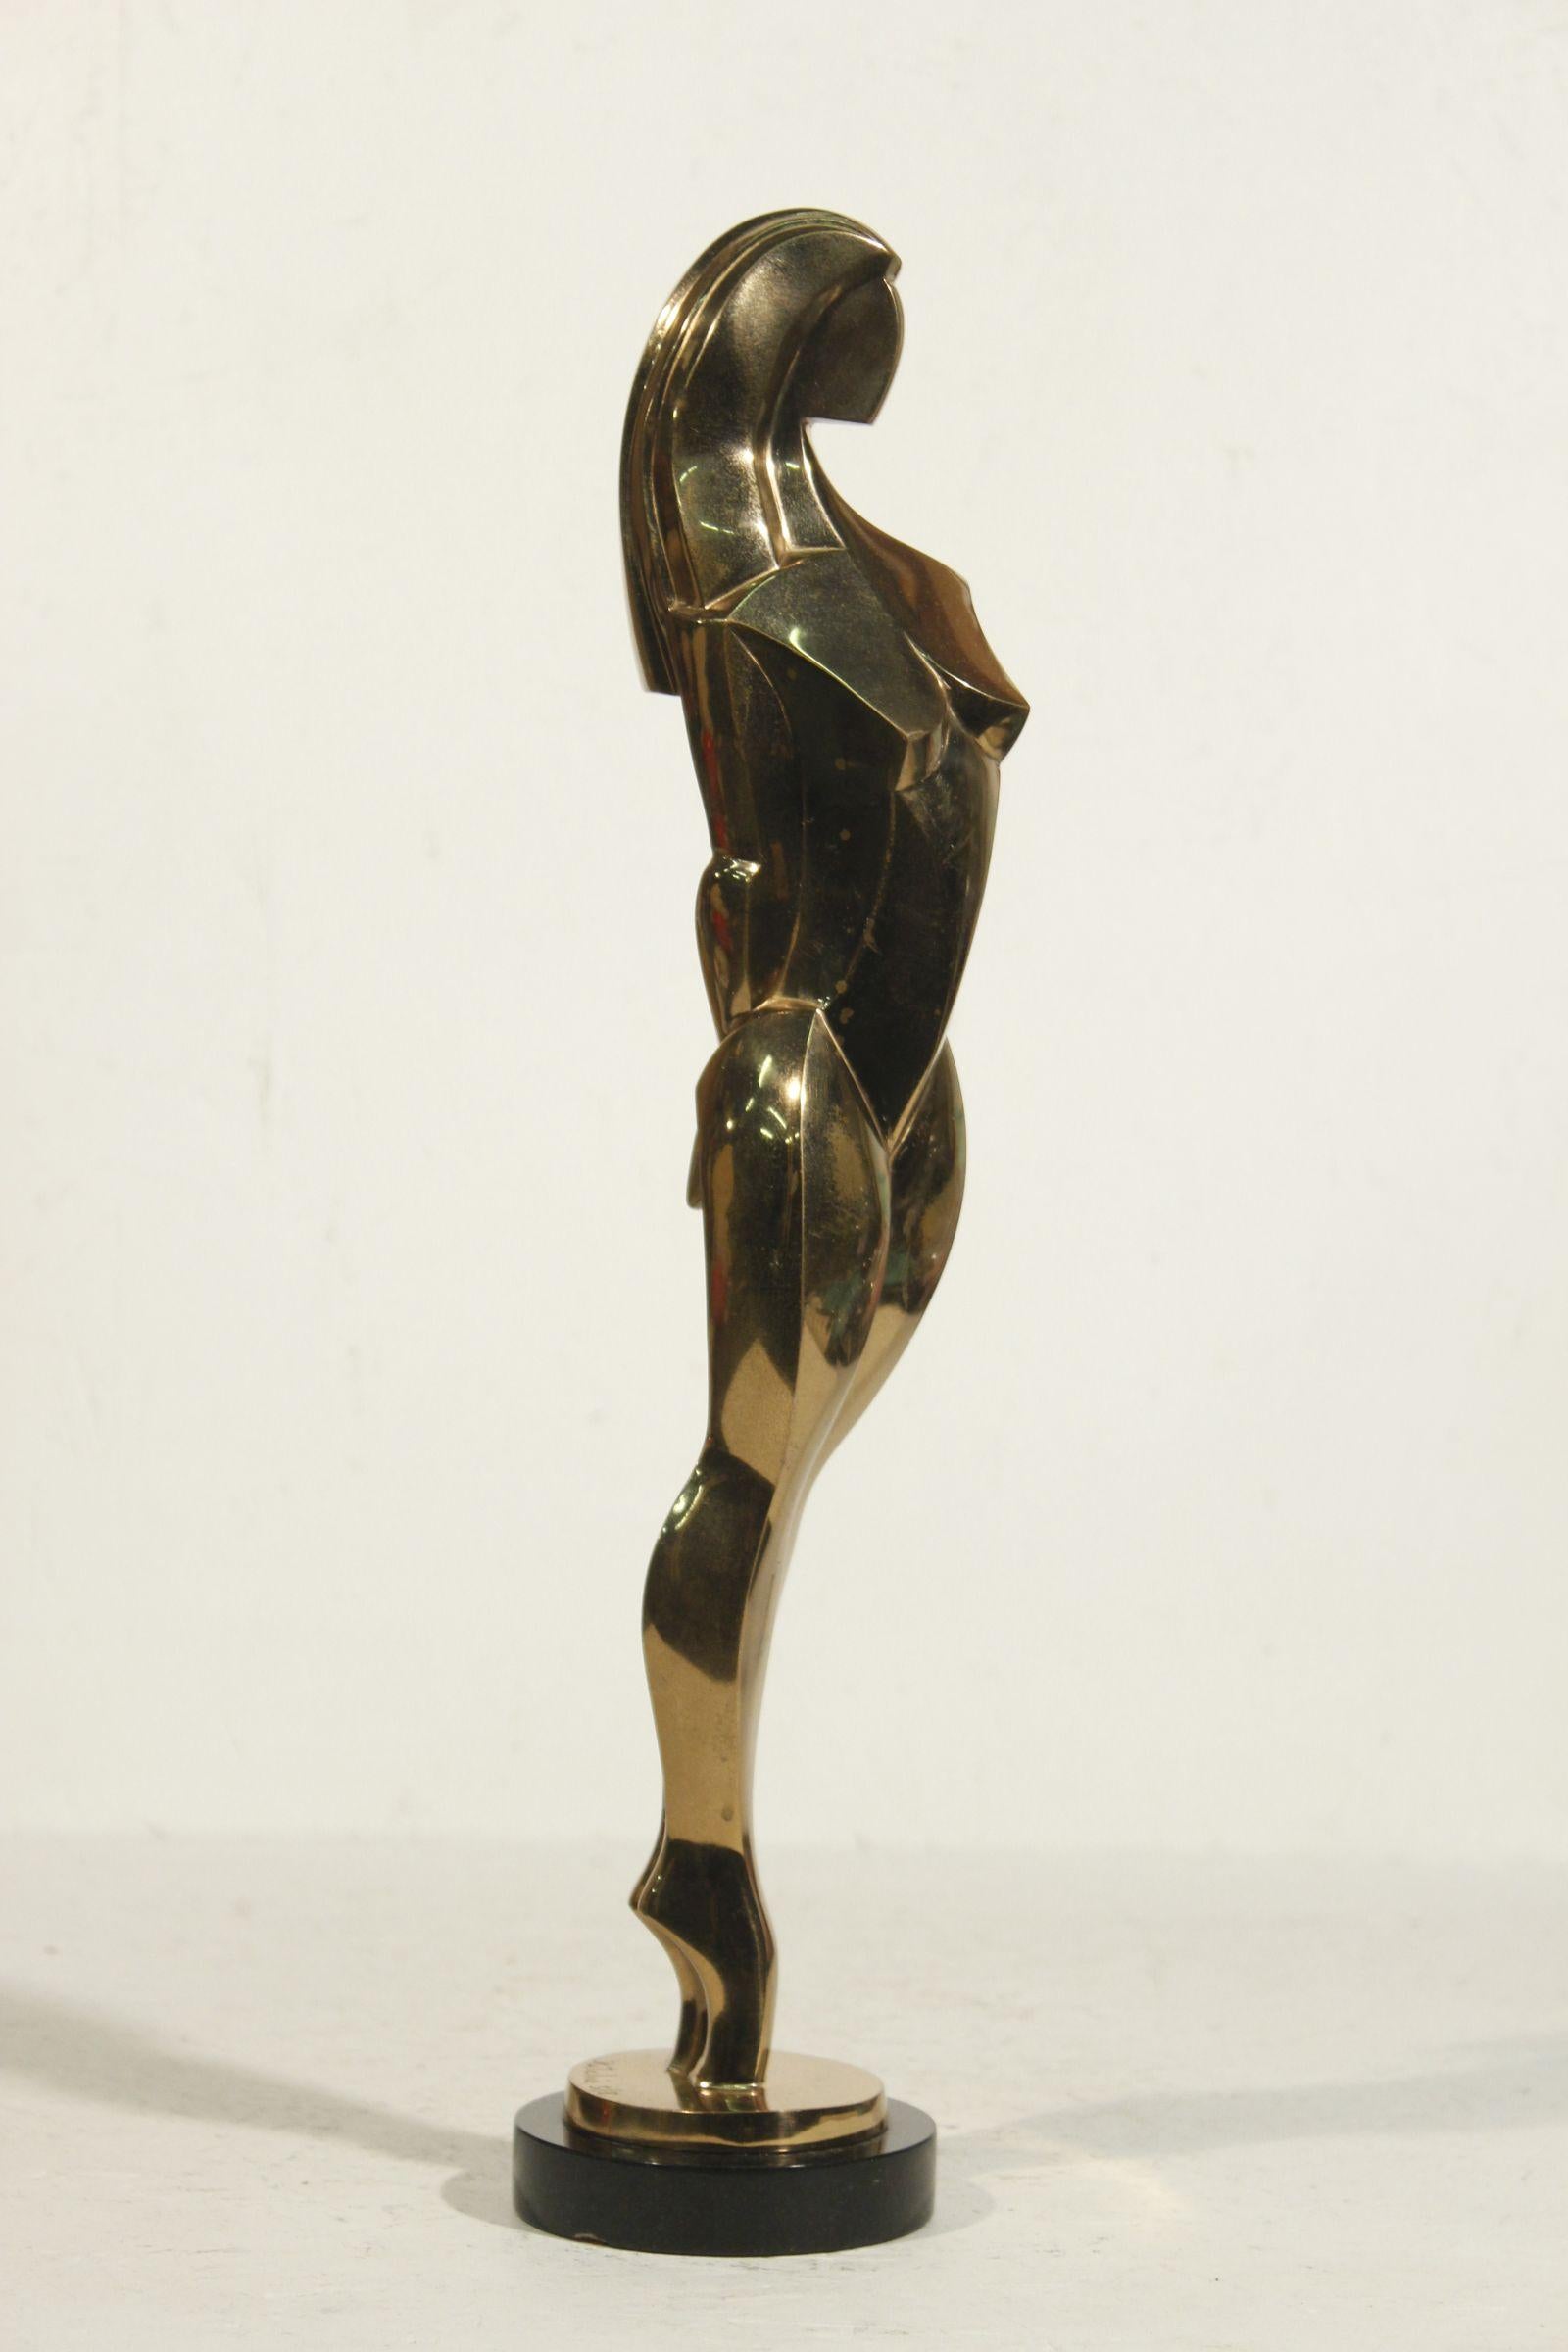 Gilt bronze sculpture of a standing woman in the figurative cubist style by Jim Ritchie circa 1990 in Vence, France, edition 5 of 8. 

In great structural condition, has no damage, however the gilt shows signs of aging in some places. 


